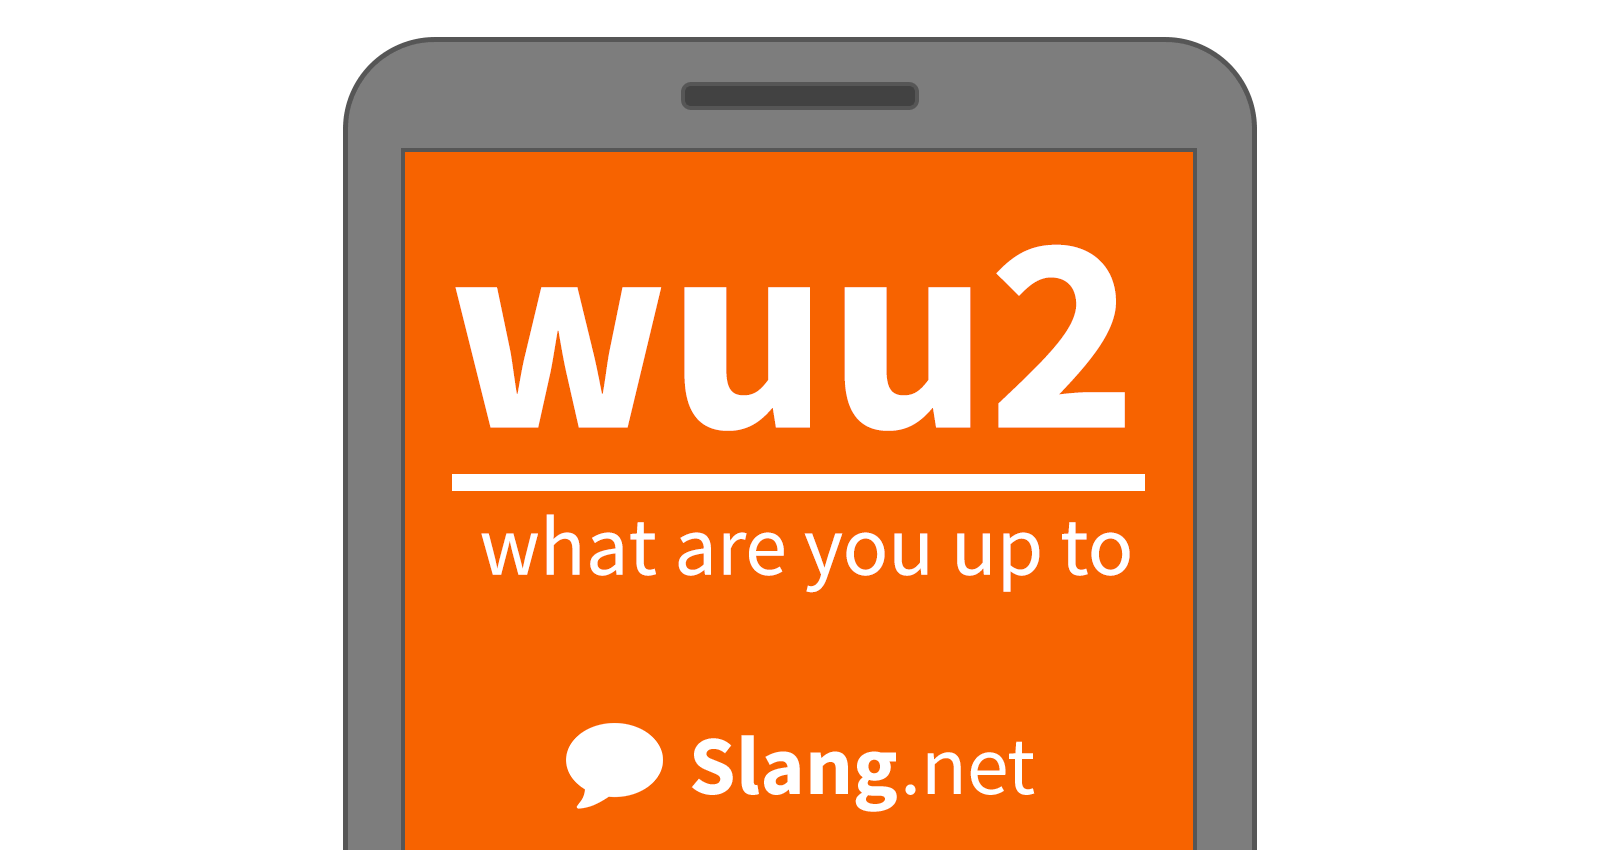 People often send wuu2 in texts and online messages